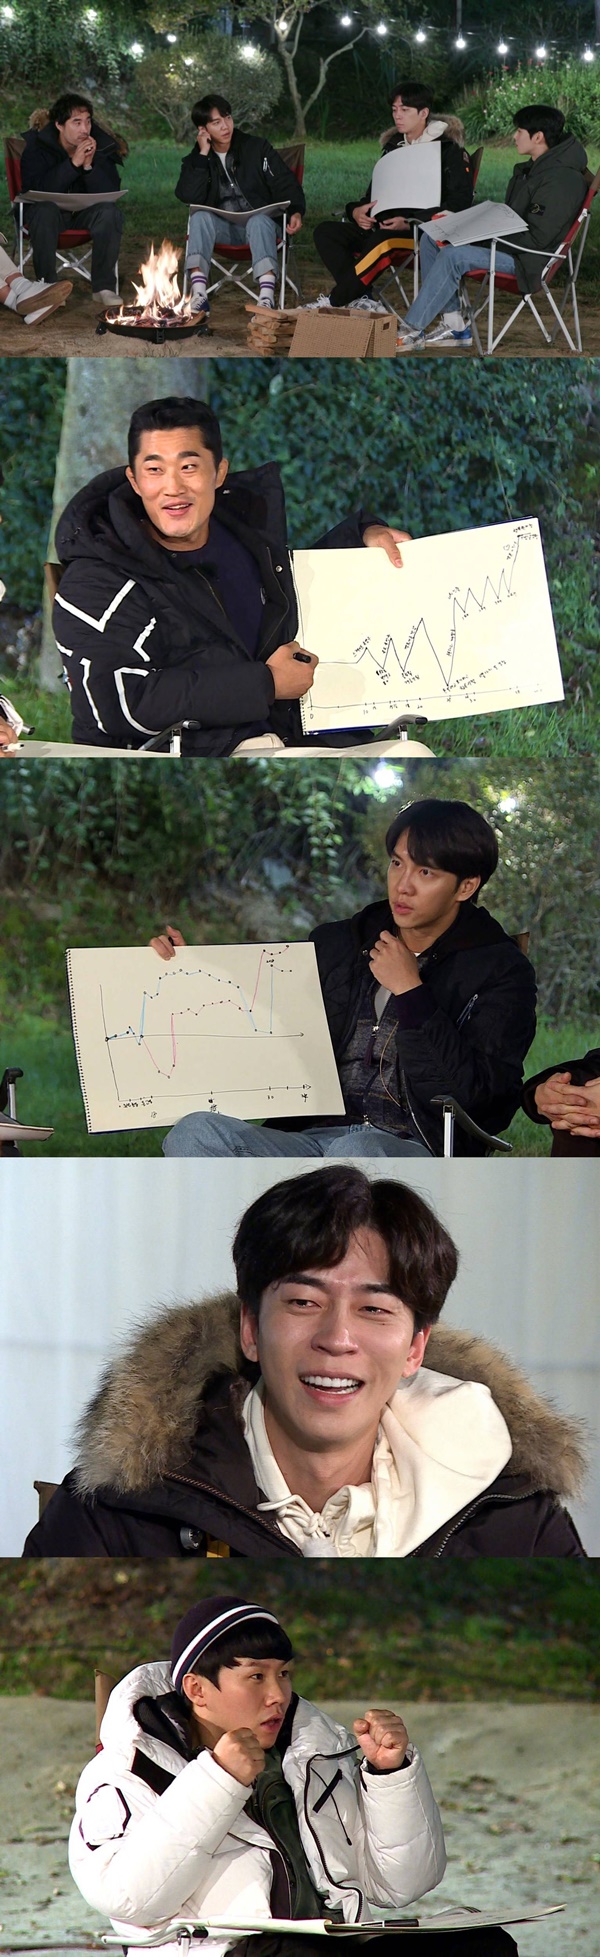 All The Butlers Lee Seung-gi Confessions the hardest time in life.In the SBS entertainment program All The Butlers broadcasted on the 25th, life graphs of Bae Seong-woo and Lee Seung-gi, Yang Se-hyeong, Shin Sung-rok, Cha Eun-woo and Kim Dong-Hyun are revealed.In a recent recording, Bae Seong-woo and All The Butlers members shared their lives by drawing life graphs.They open the graph and openly Confessions about their own life bends.Fighter Kim Dong-Hyun told me about the days when he quit his workout for a while and worked part-time jobs such as PC room and blocked sewer drilling.Lee Seung-gi said, I did not hear the voice of my heart in the past. Confessions, frankly revealing the hardest days of my lifeIn particular, Shin Sung-rok was looking at his graph and Bae Seong-woo said, (Shin Sung-rok) worked really hard, and he was full of fighting.I felt such an energy and I was so cool and envious.  (These days) I lived without knowing who I was, he said. I lived really hard, but I miss the past, he said, raising deep sympathy because he missed his rookie days, which were full of passion.In addition, the members challenged the paragliding of the sky, both Bae Seong-woo and the members, according to the proposal of Bae Seong-woo, Lets find out the meaning of the sky.It will air at 6:25 p.m. this evening.